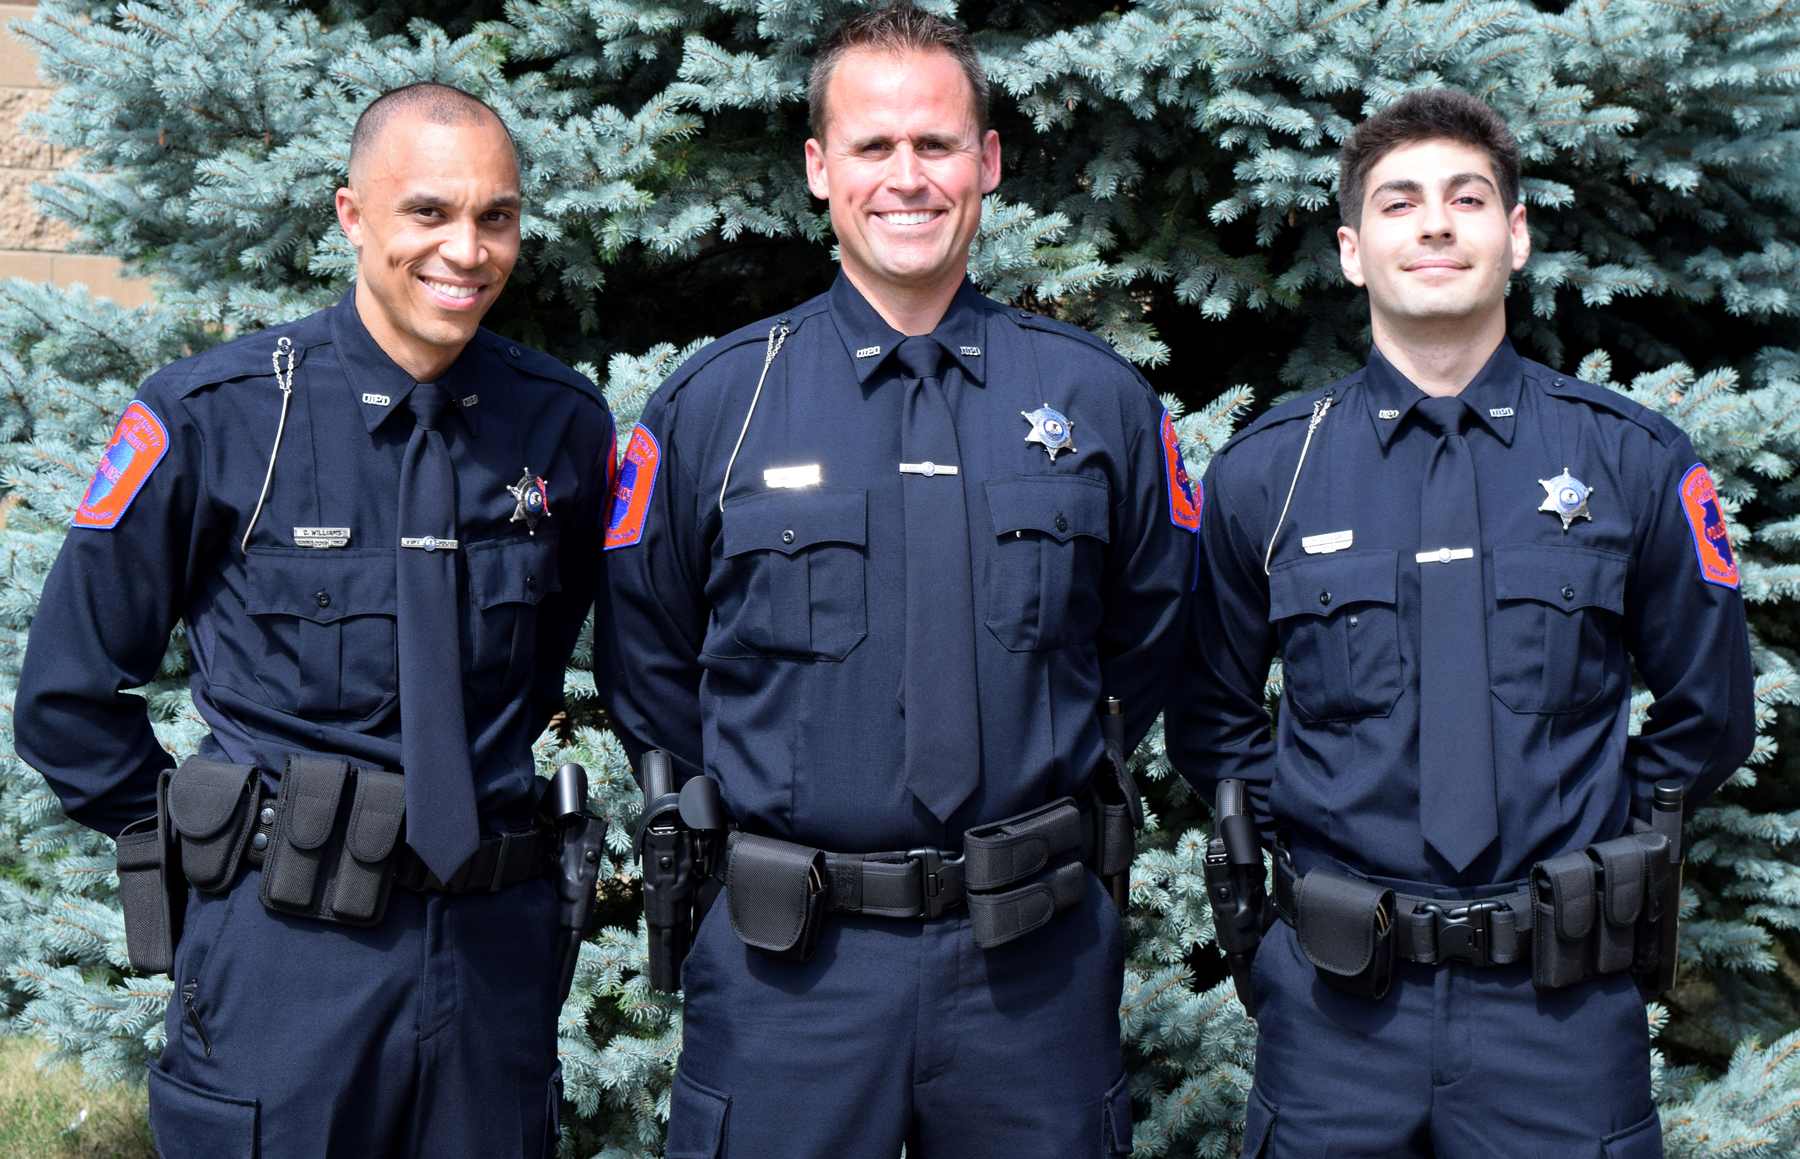 Officers Christopher Williams, Michael Mitrou and Mohamed Alsaqri.